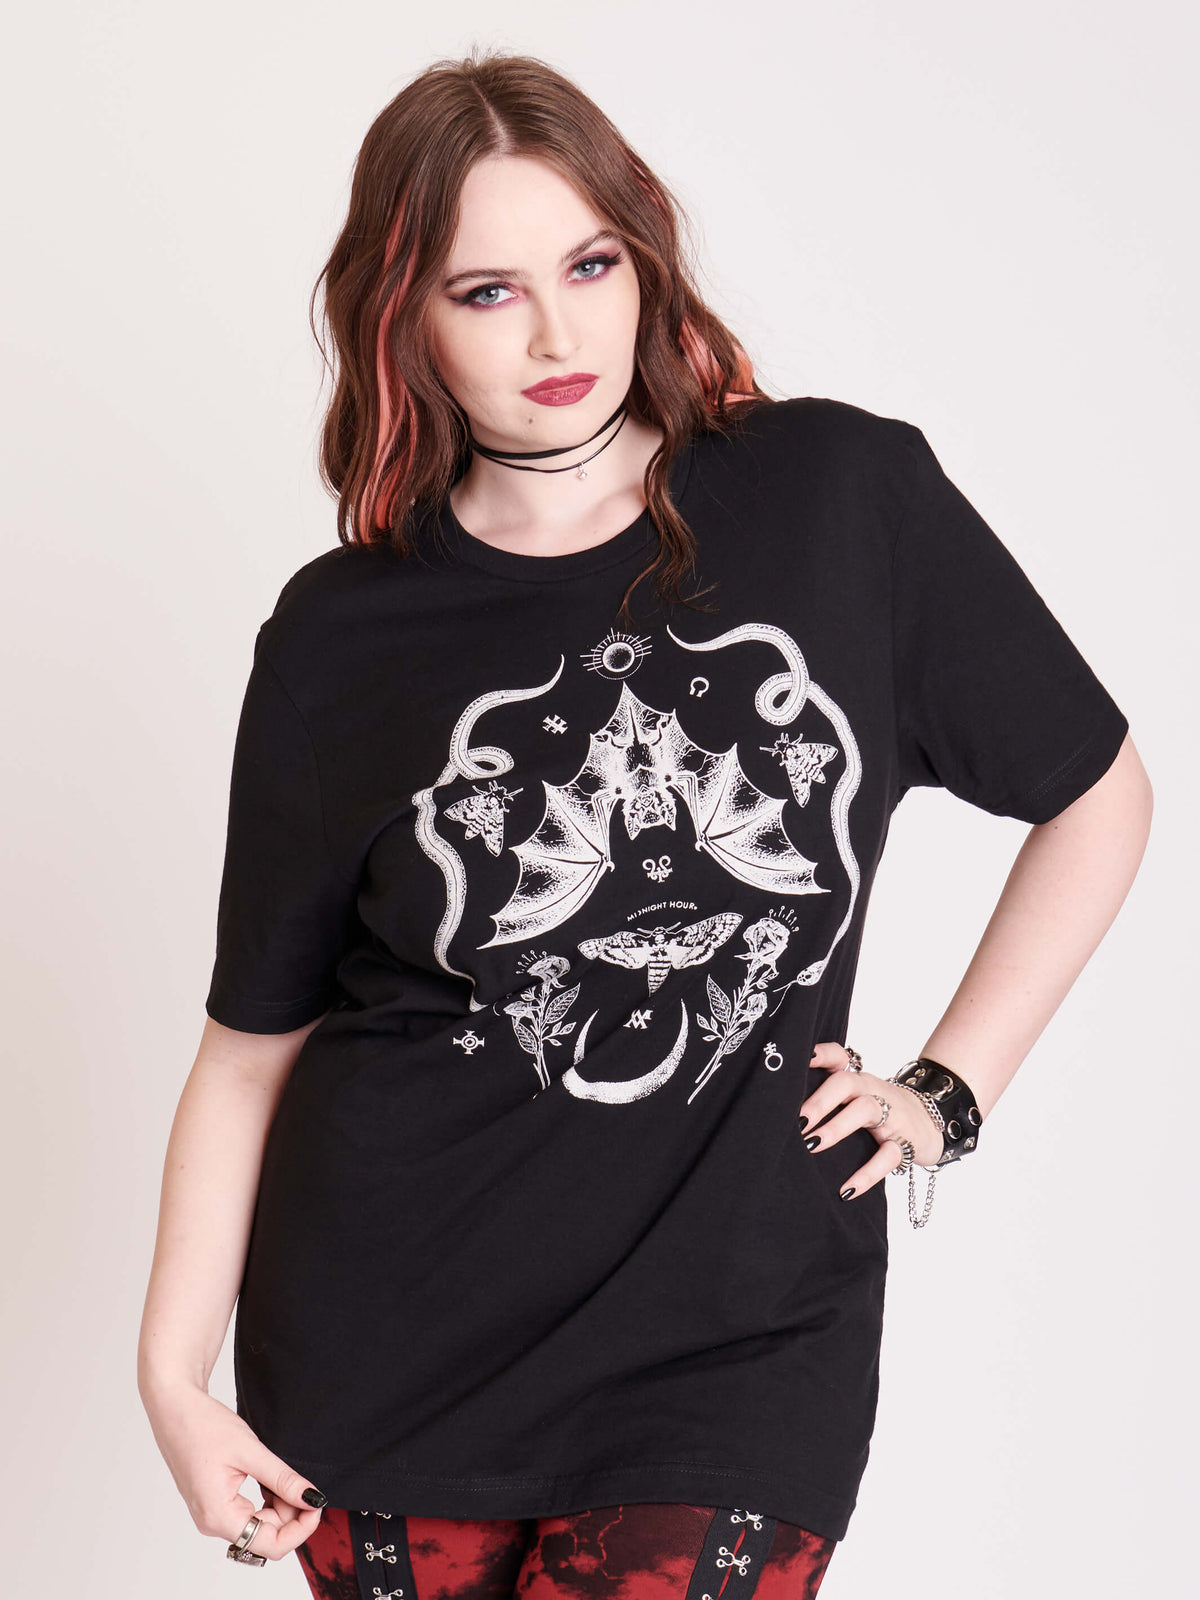  unisex t-shirt with snakes, bats and deathmoth. 